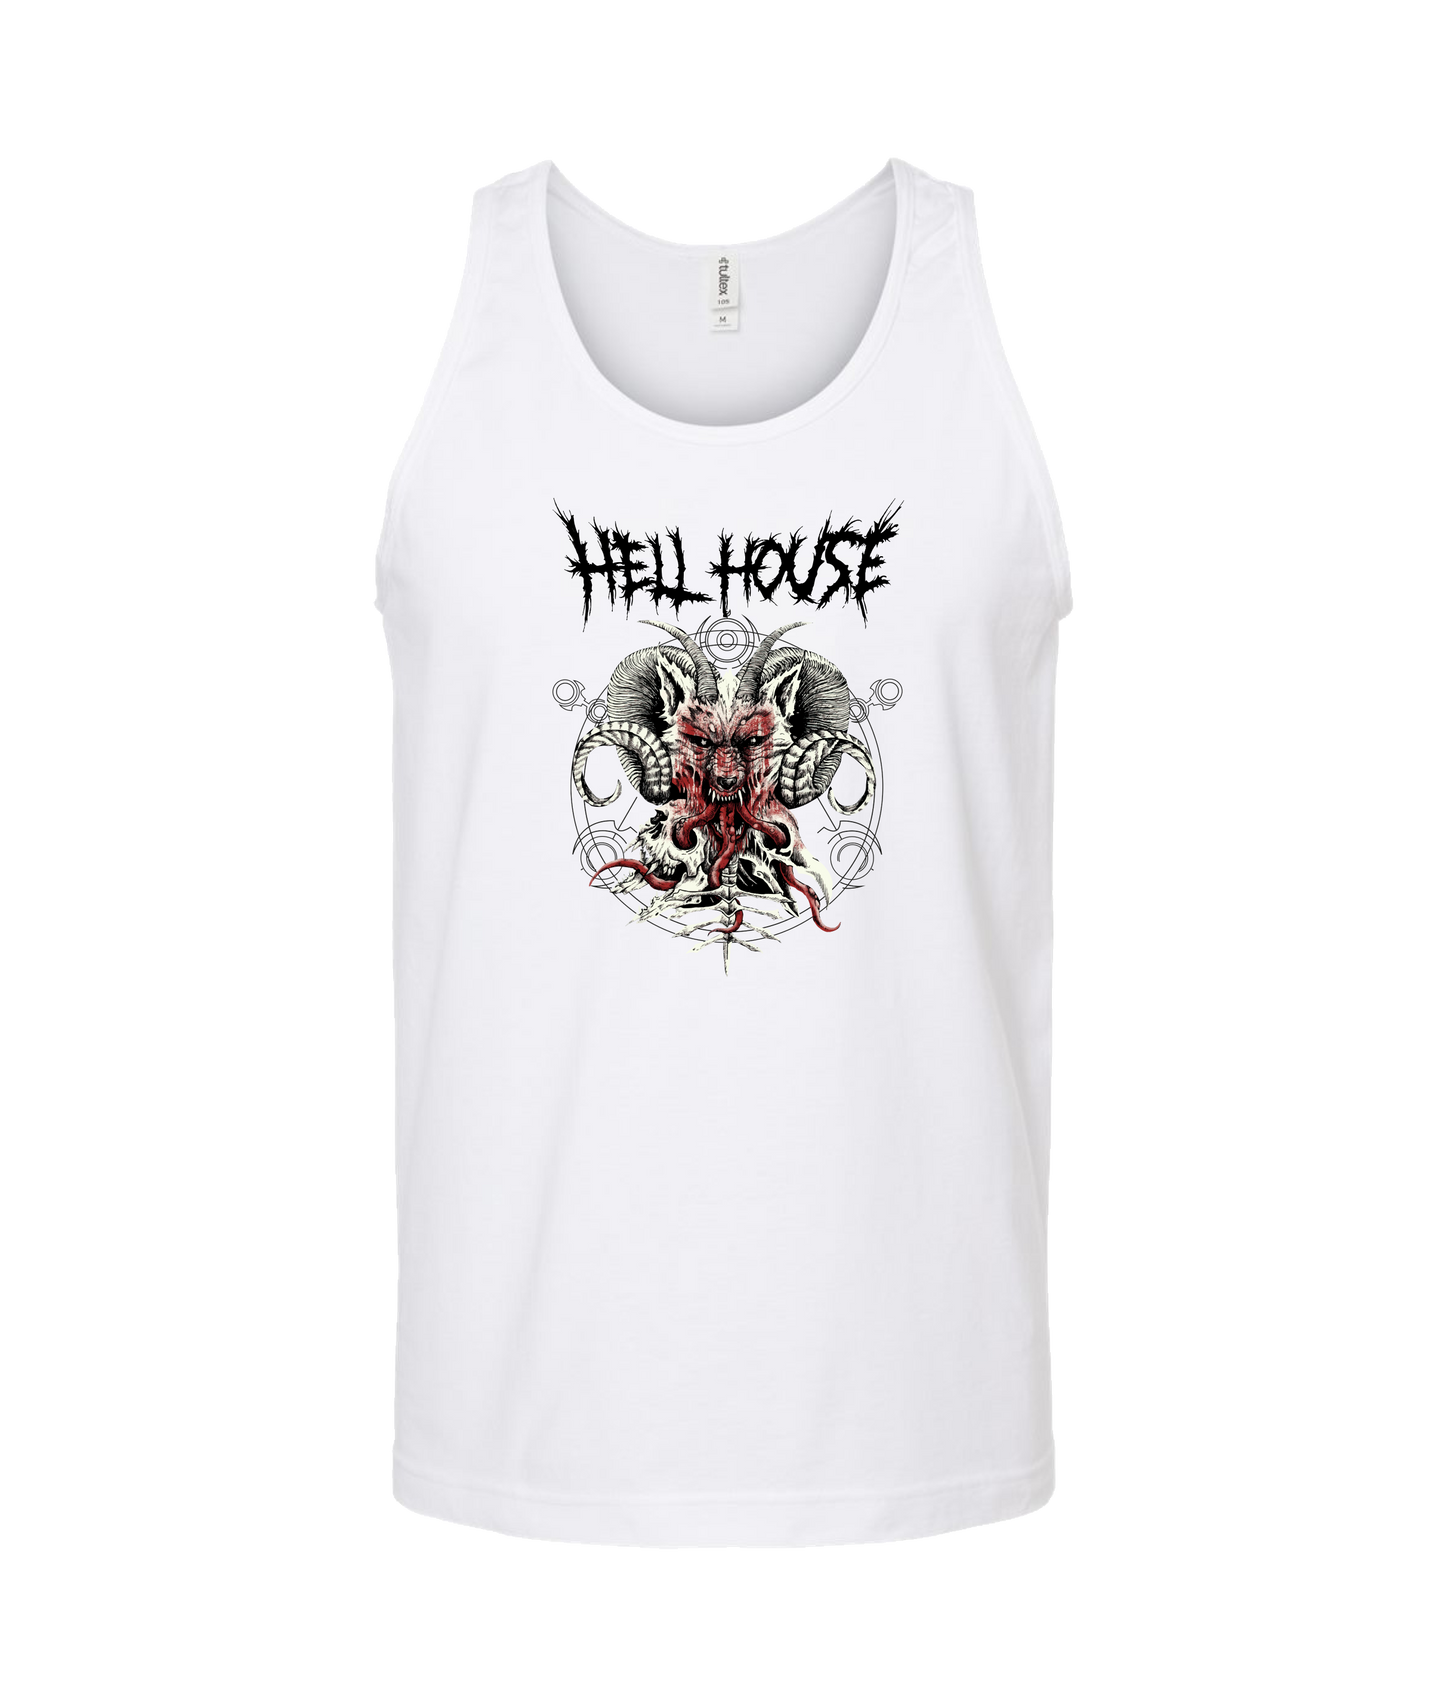 Hellhouse crypt - WOLFHORN - White Tank Top